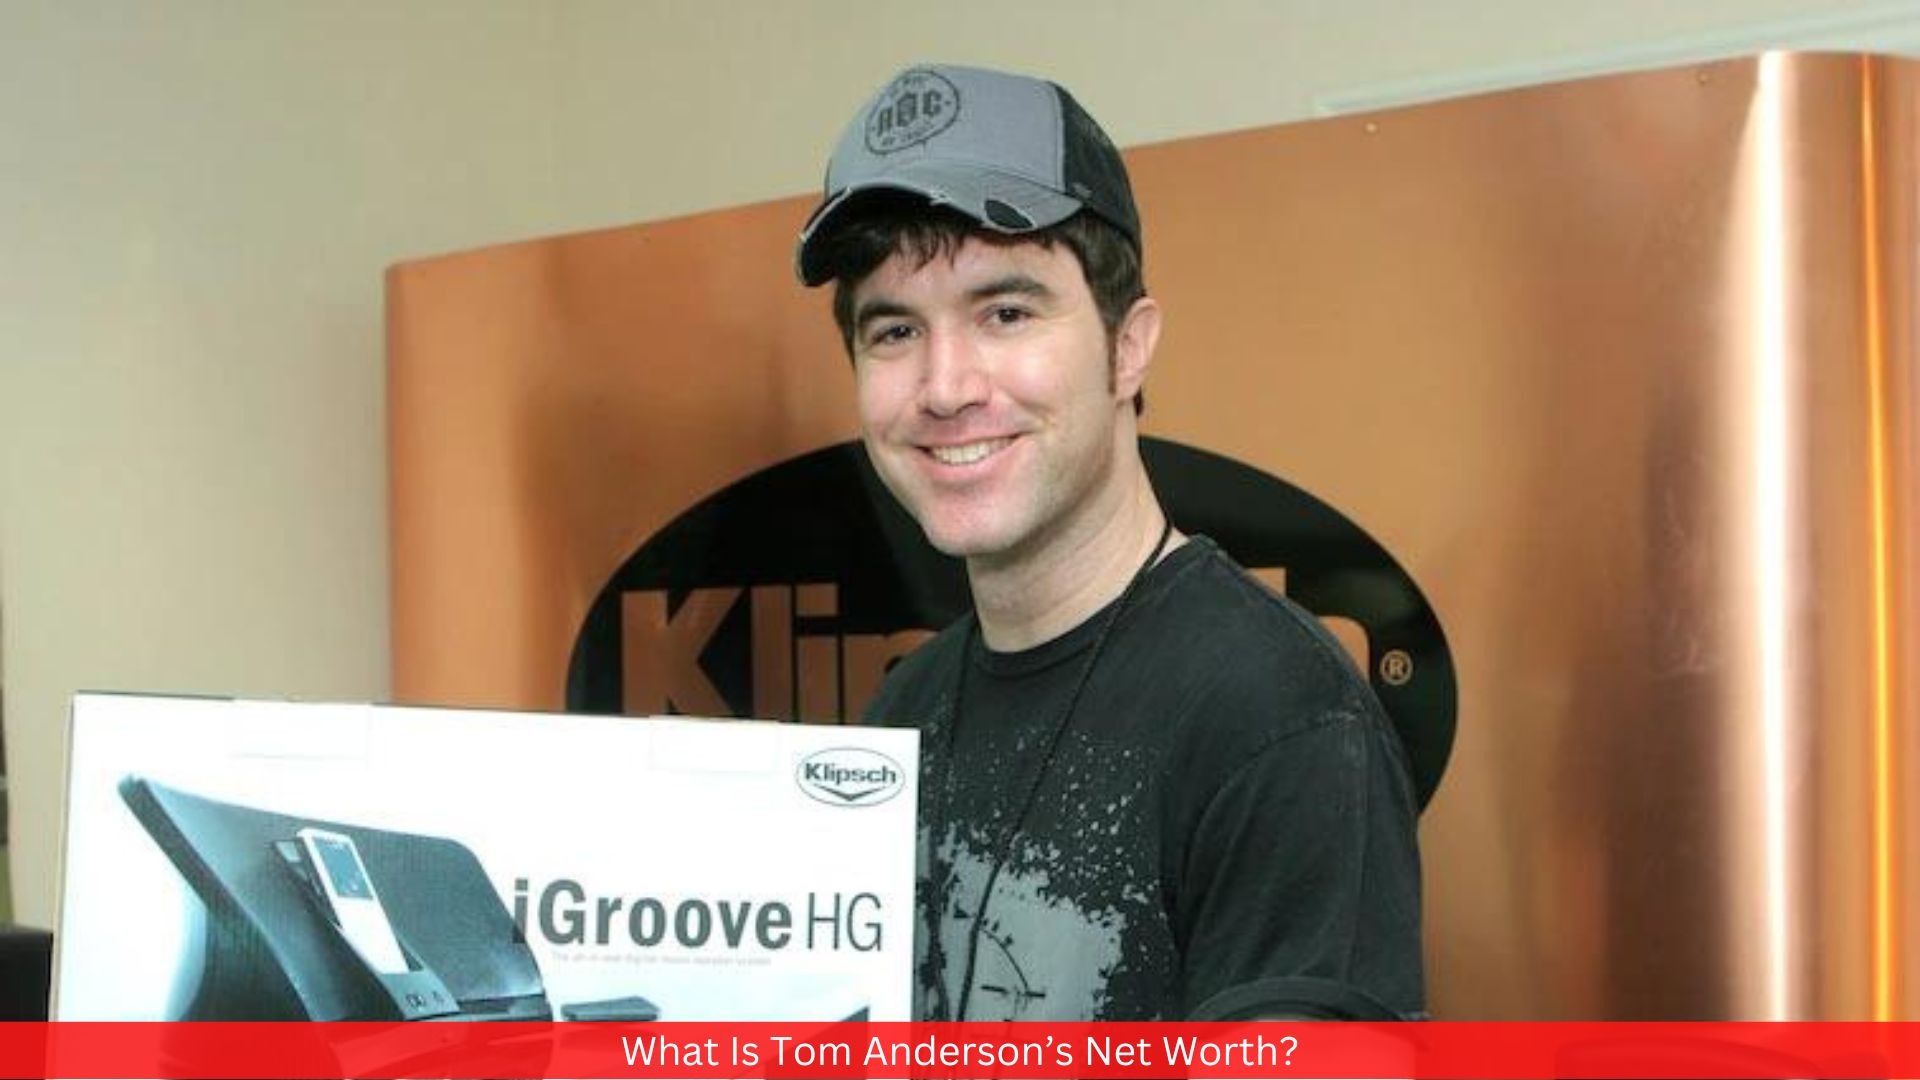 What Is Tom Anderson’s Net Worth?